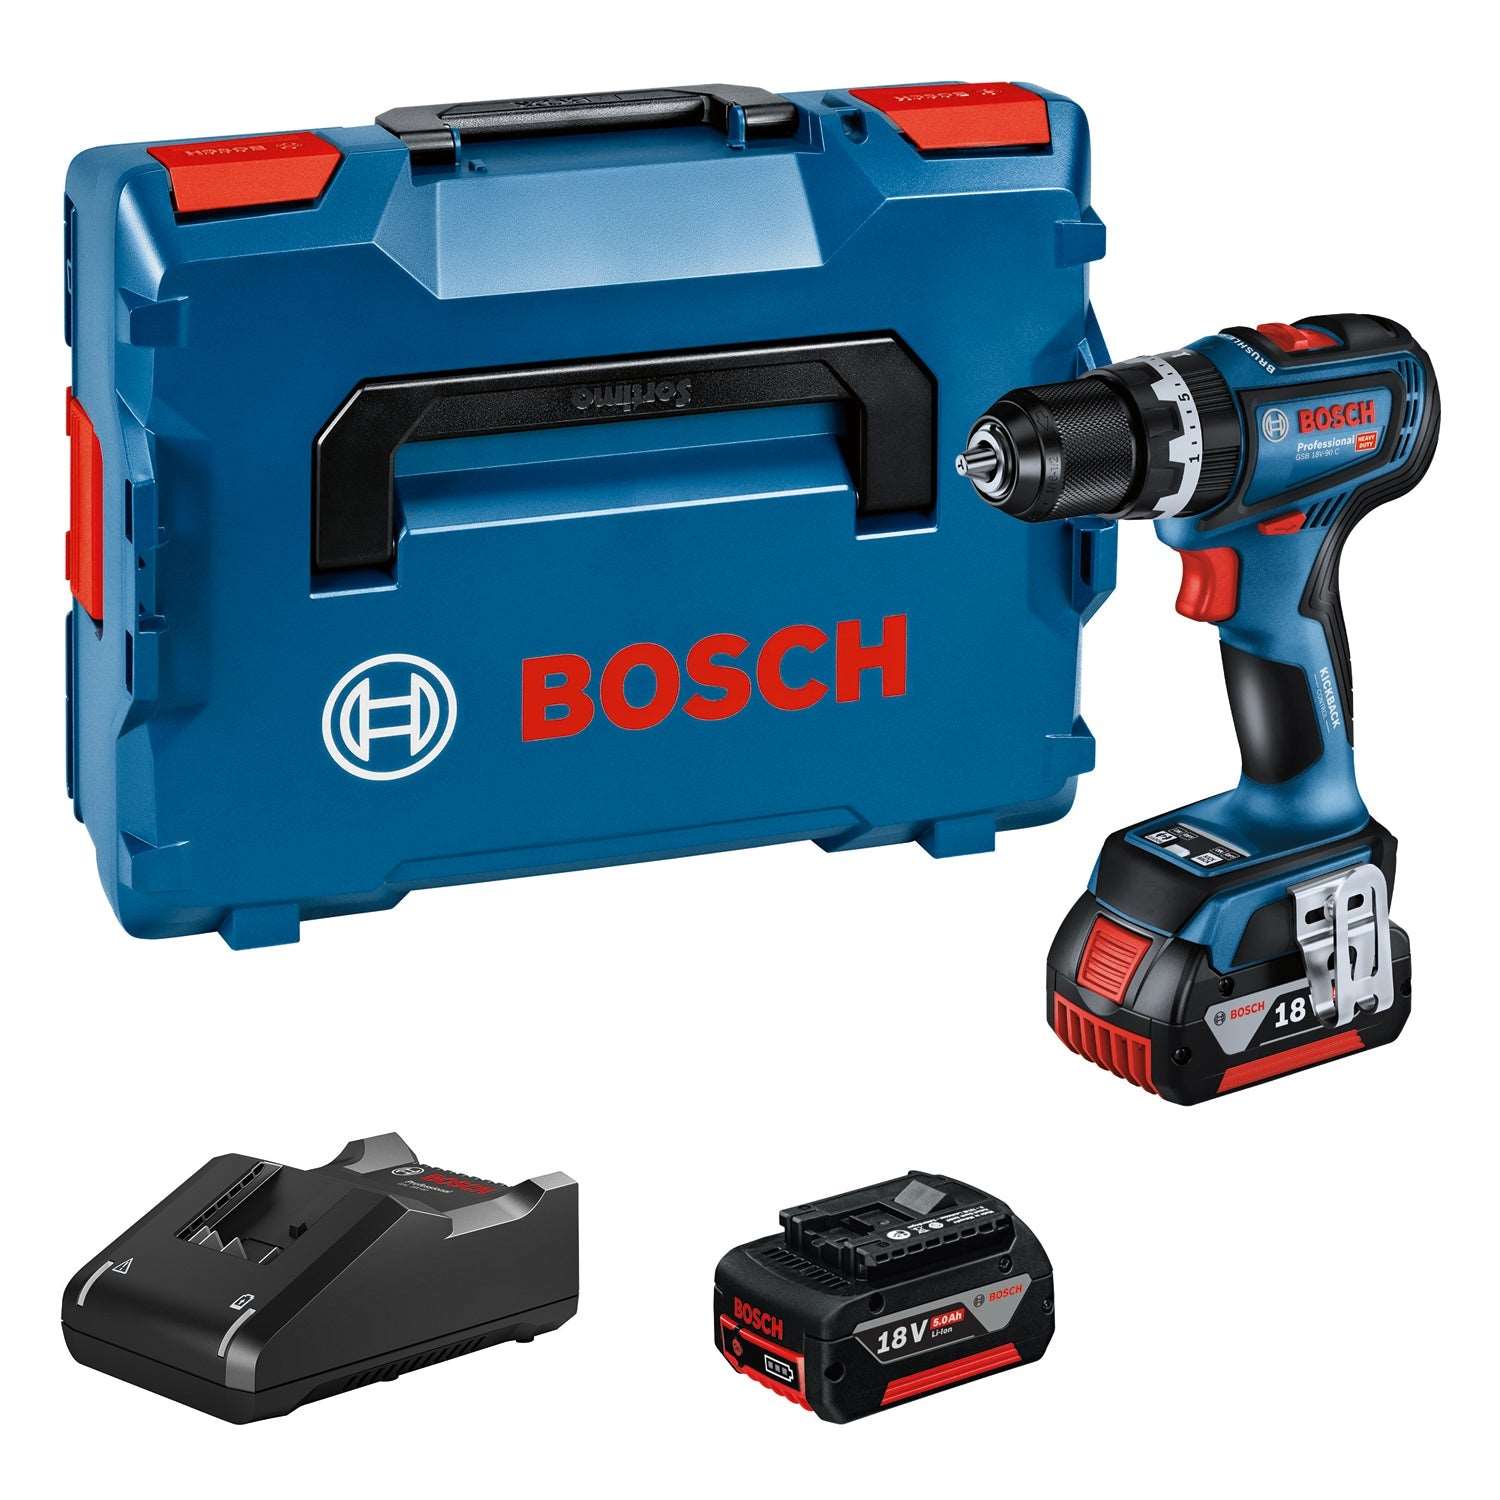 Bosch Professional Cordless Impact Drill GSB 18V-90 C 06019K6106 Power Tool Services